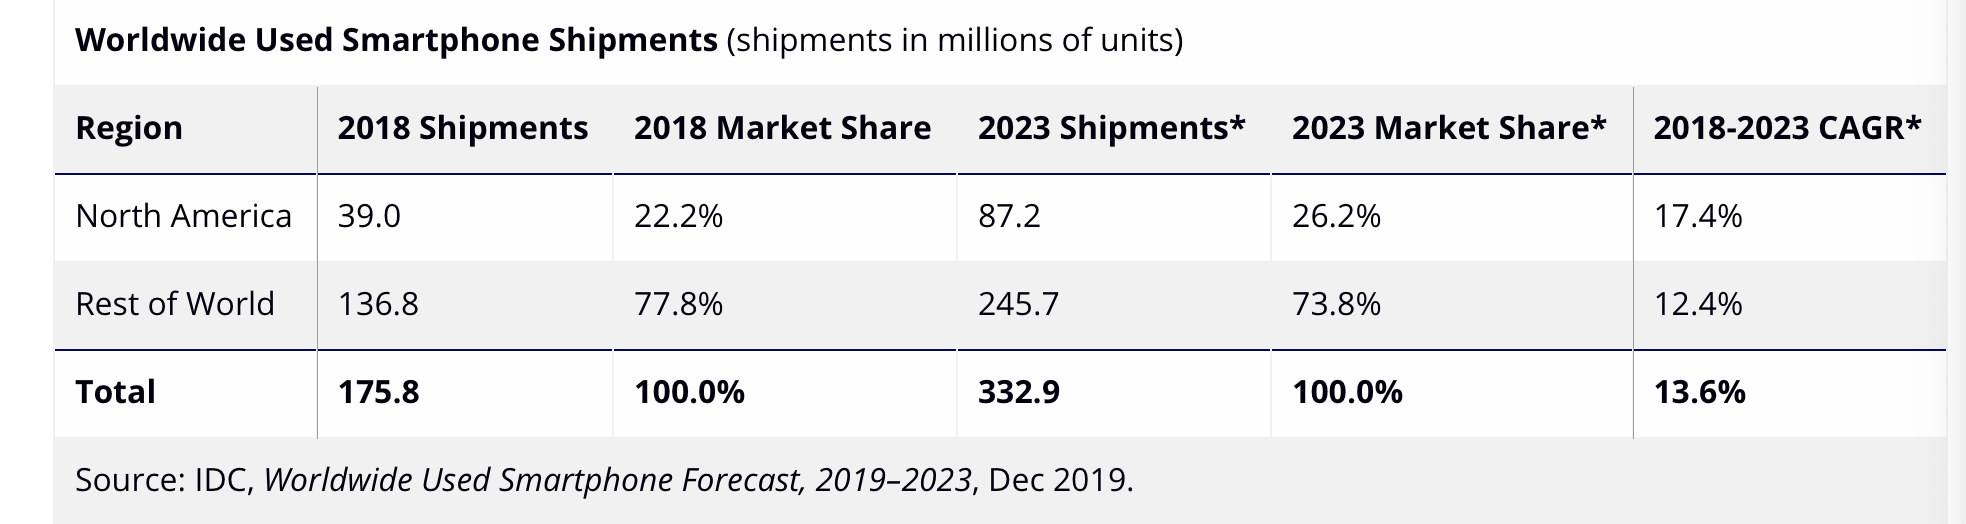 Market for used smartphones to grow to 332.9 million units in 2023